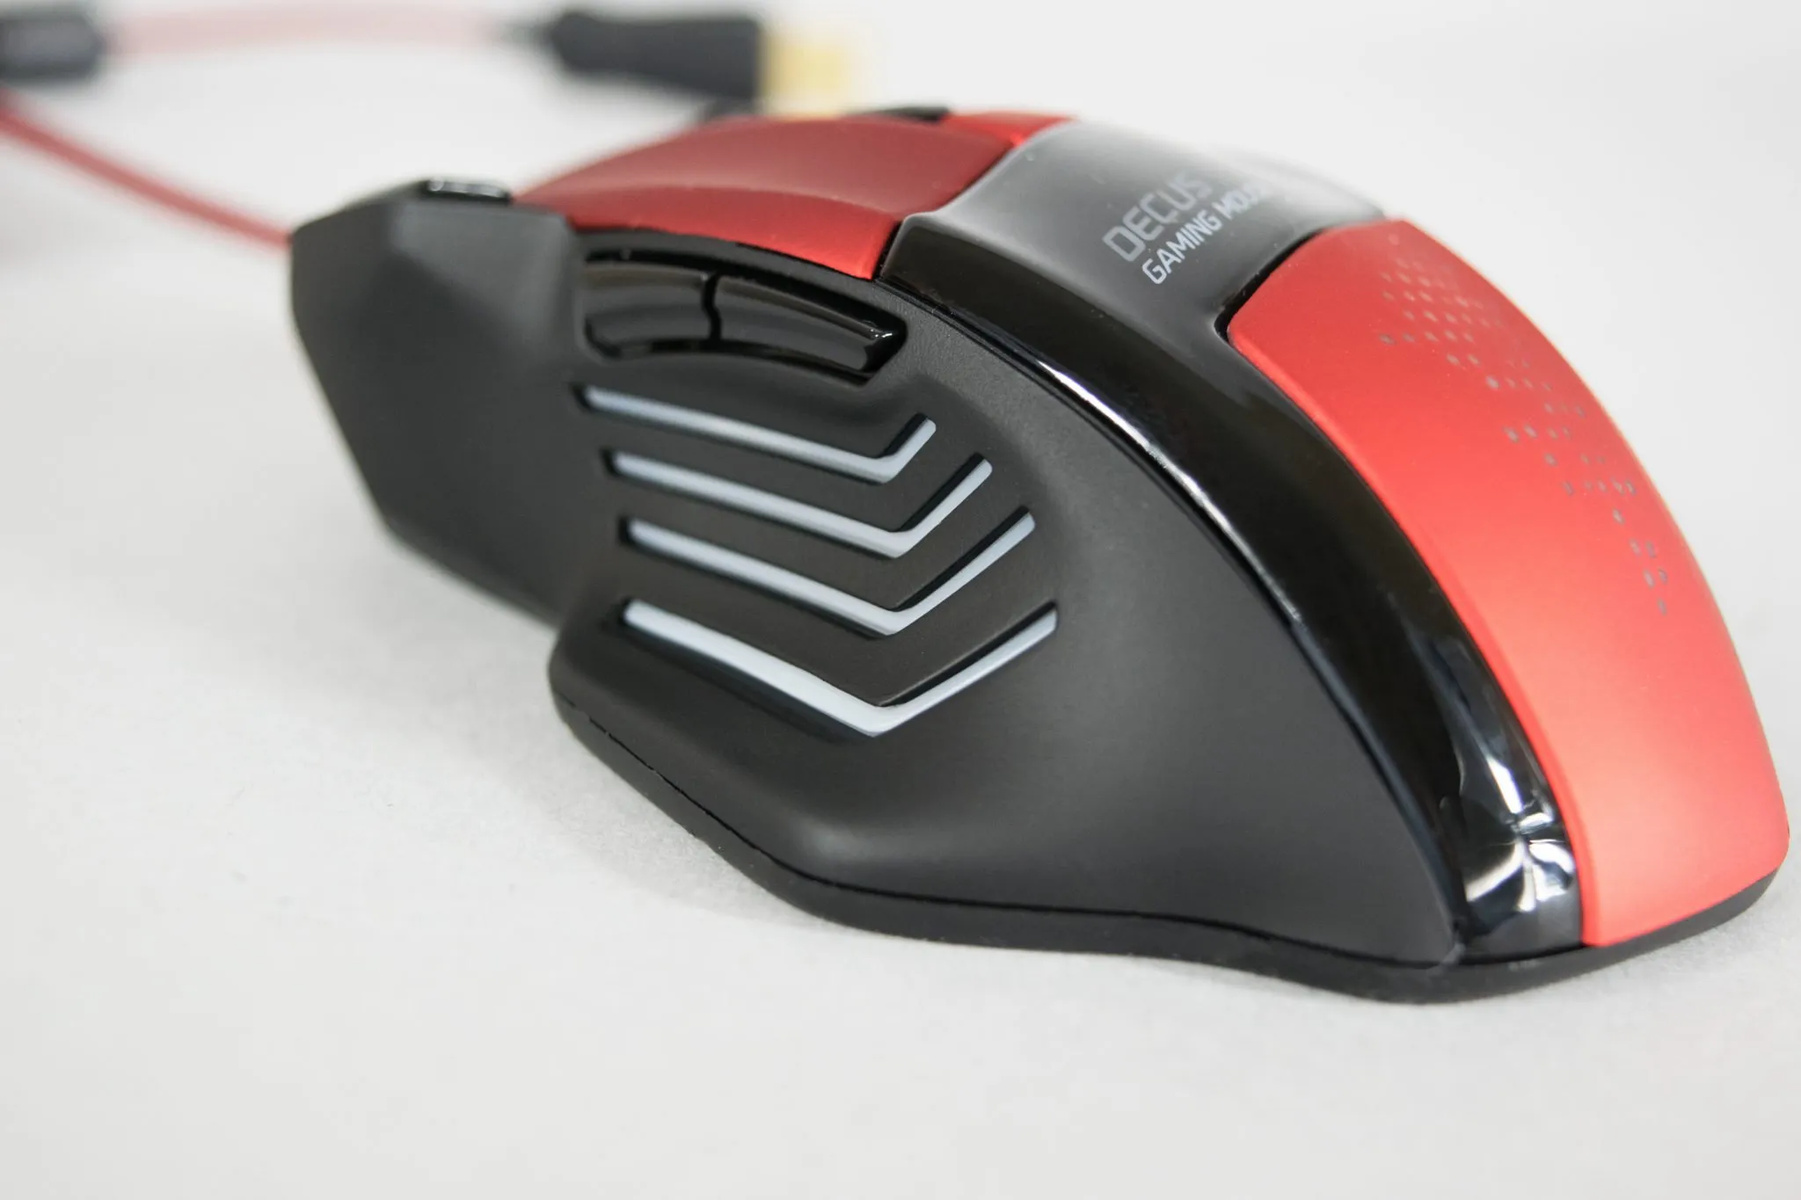 How To Download Decus Gaming Mouse Driver?